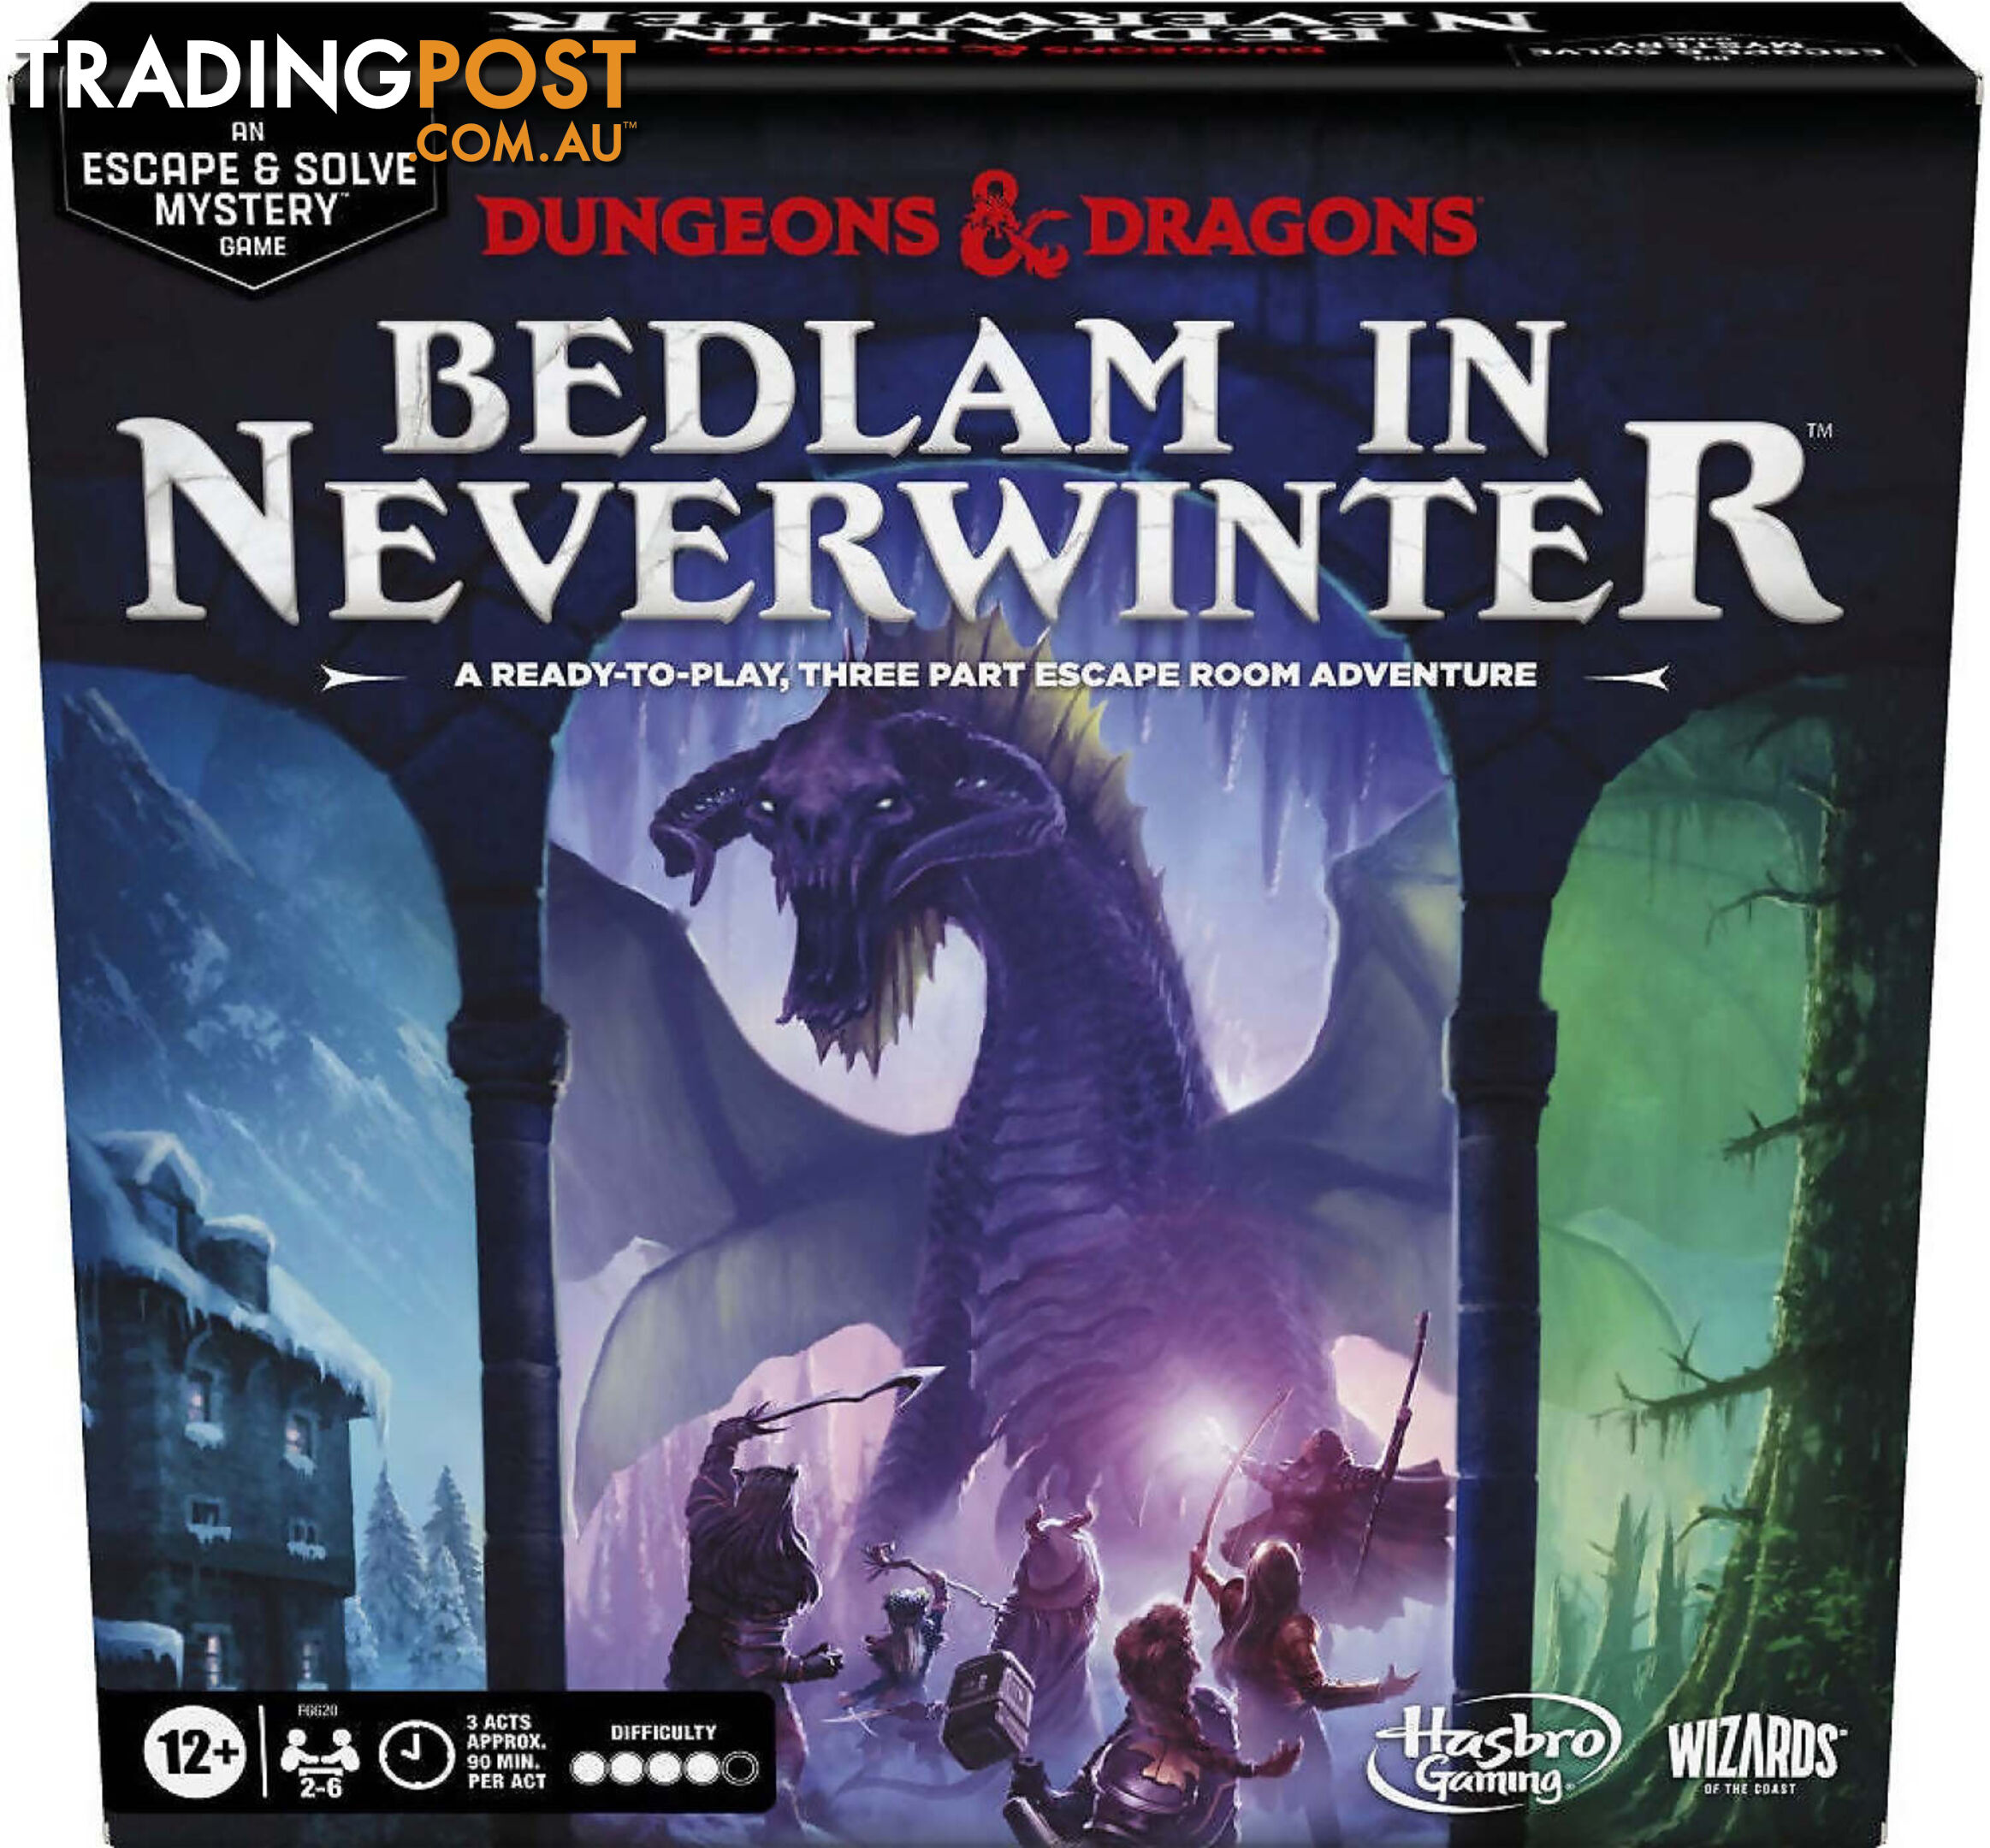 Dungeons And Dragons - Bedlam In Neverwinter An Escape & Solve Mystery Game - Hasbro - Hbf66200000 - 195166214771